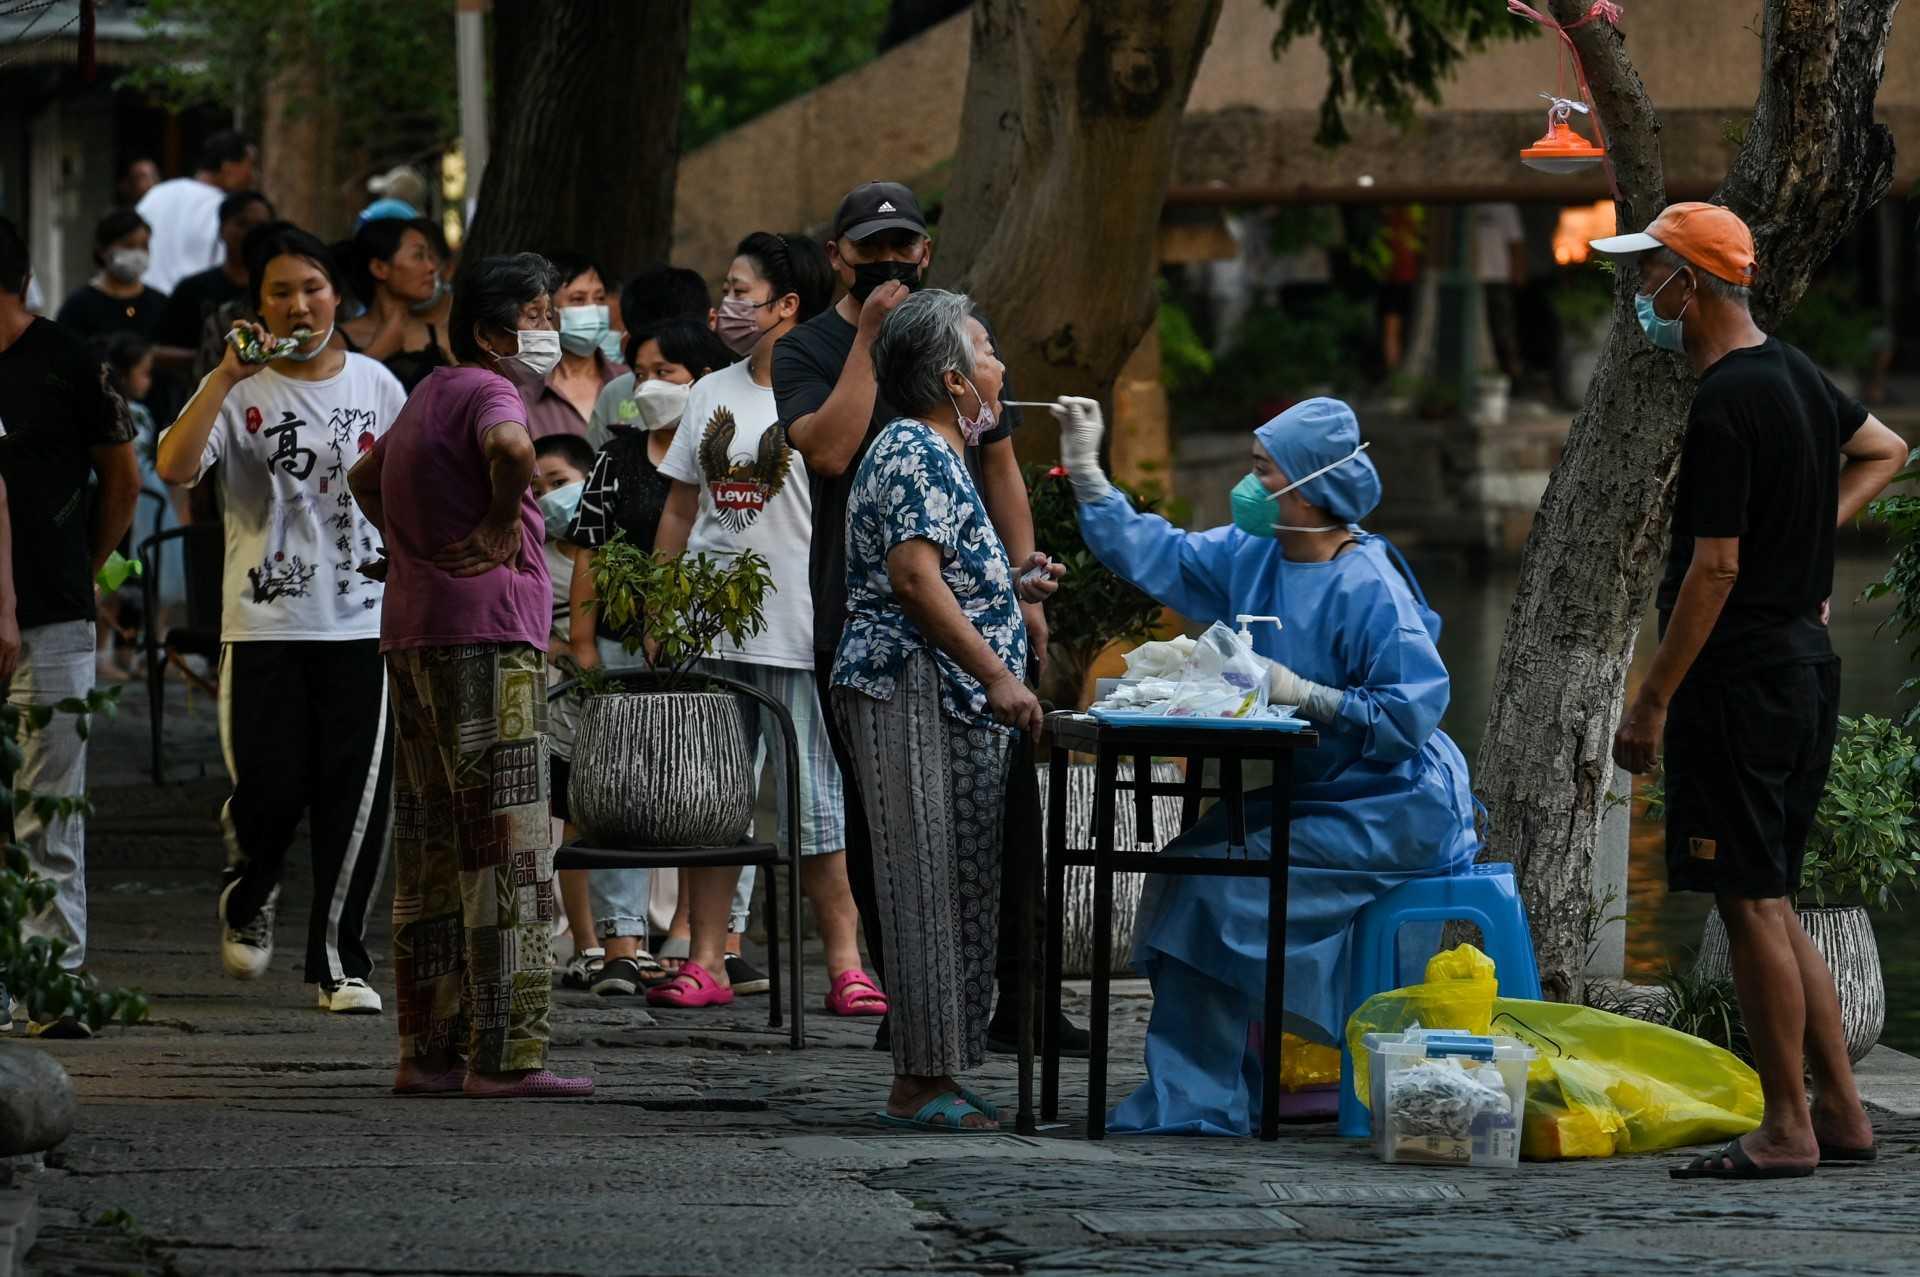 A health worker takes a swab sample from a woman to test for Covid-19 next to a channel in the Zhujiajiao ancient water town in Shanghai, on July 31. Photo: AFP